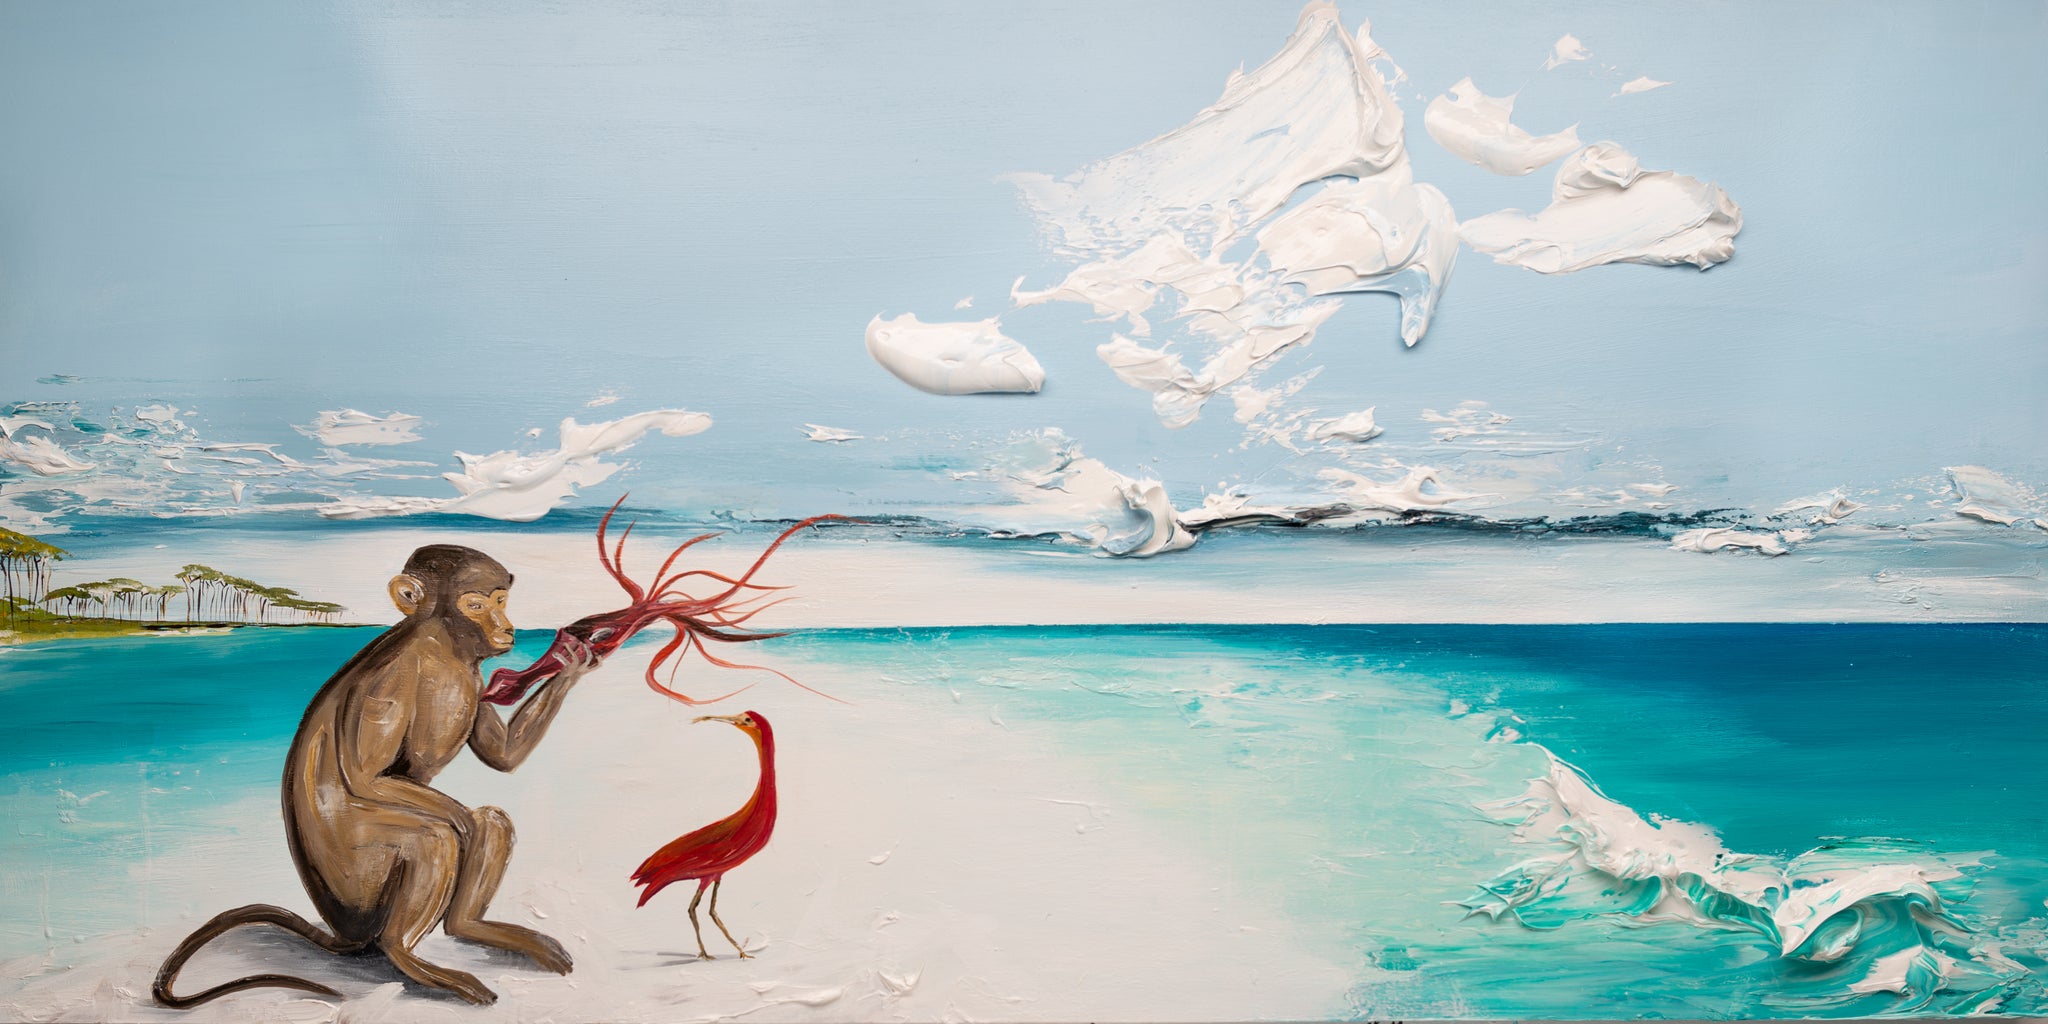 Day at the Beach with Monkey, Squid, and Scarlet Ibis, 72x36